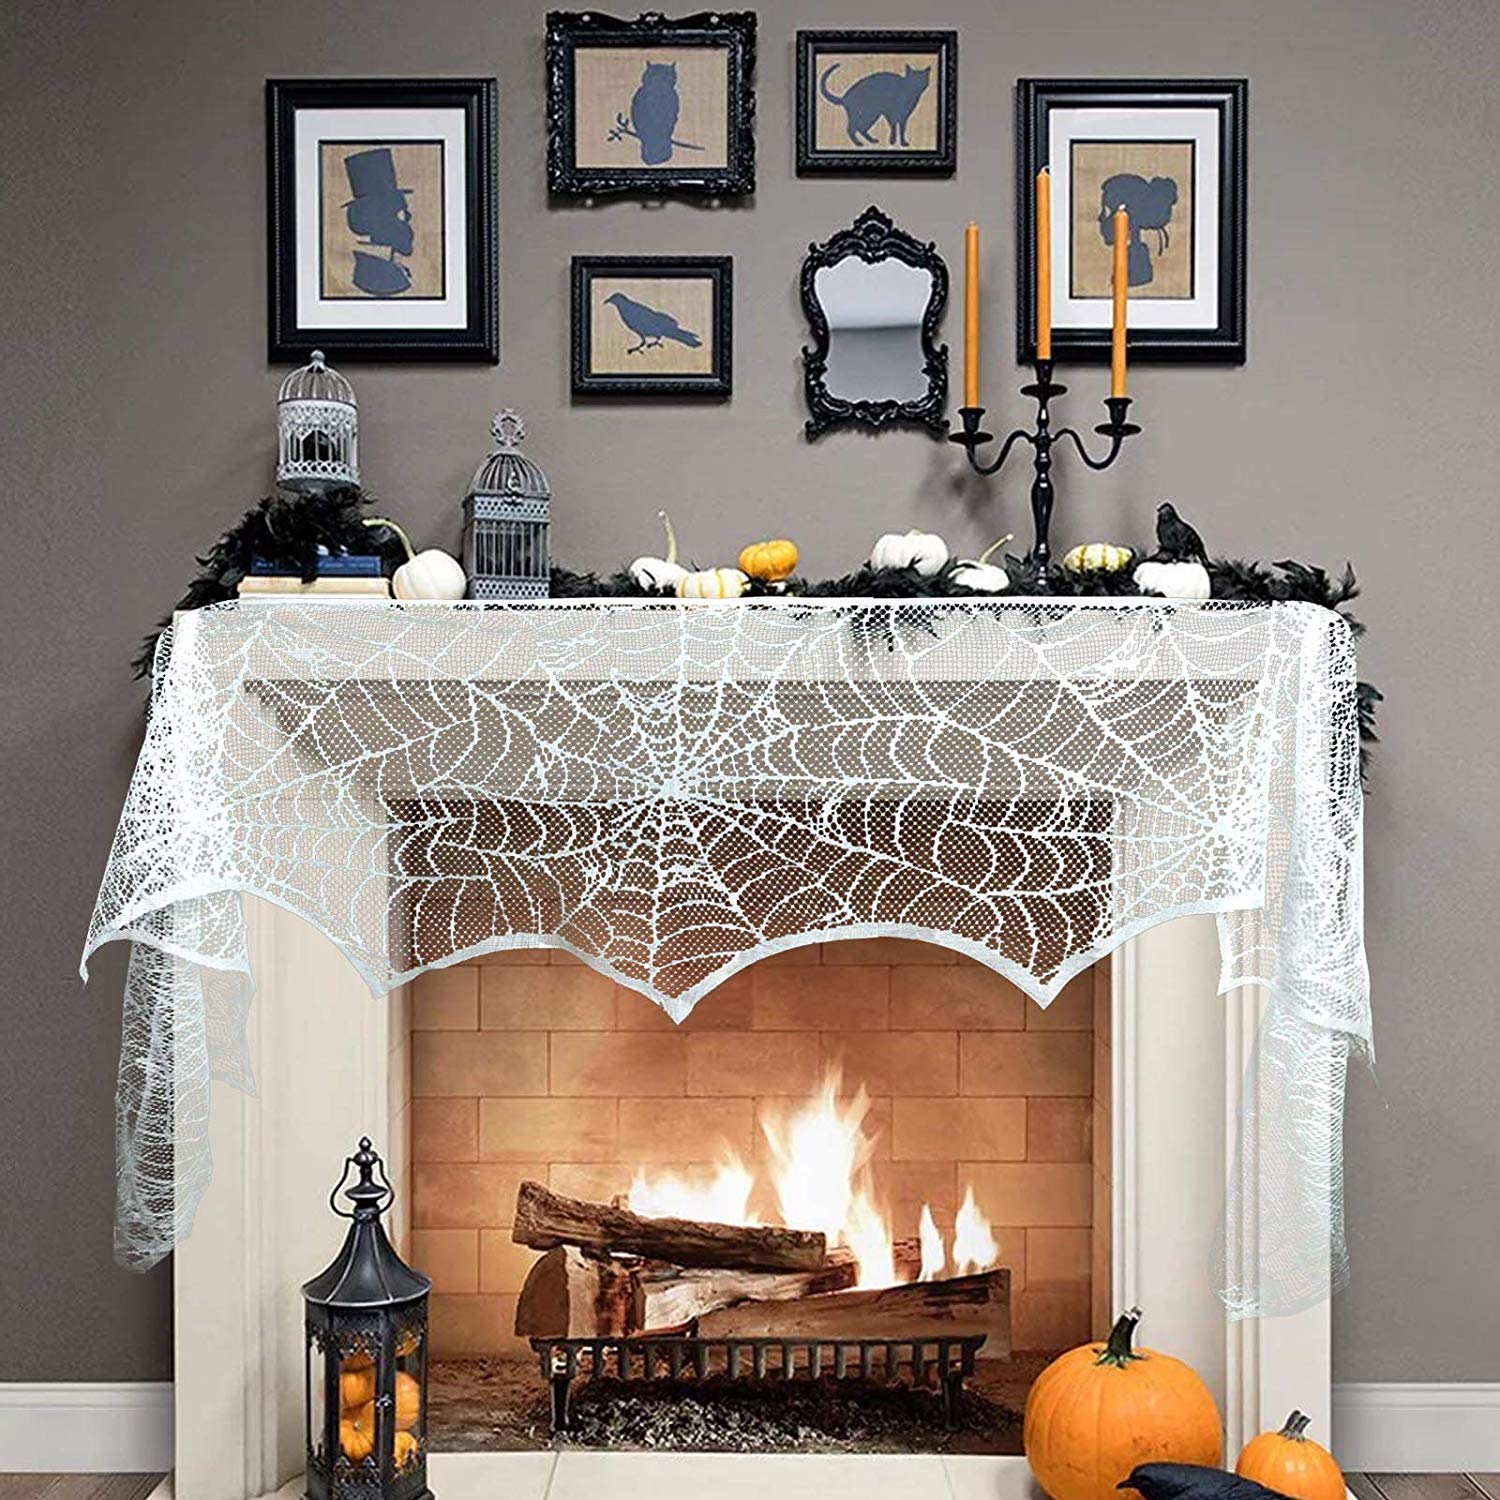 Brick Fireplace with White Mantle Beautiful Vlovelife 18 X 96 Halloween Decorations Spiderweb Mantel Scarf Polyester Cobweb Fireplace Mantel Scarf for Halloween Party Festival Scary Movie